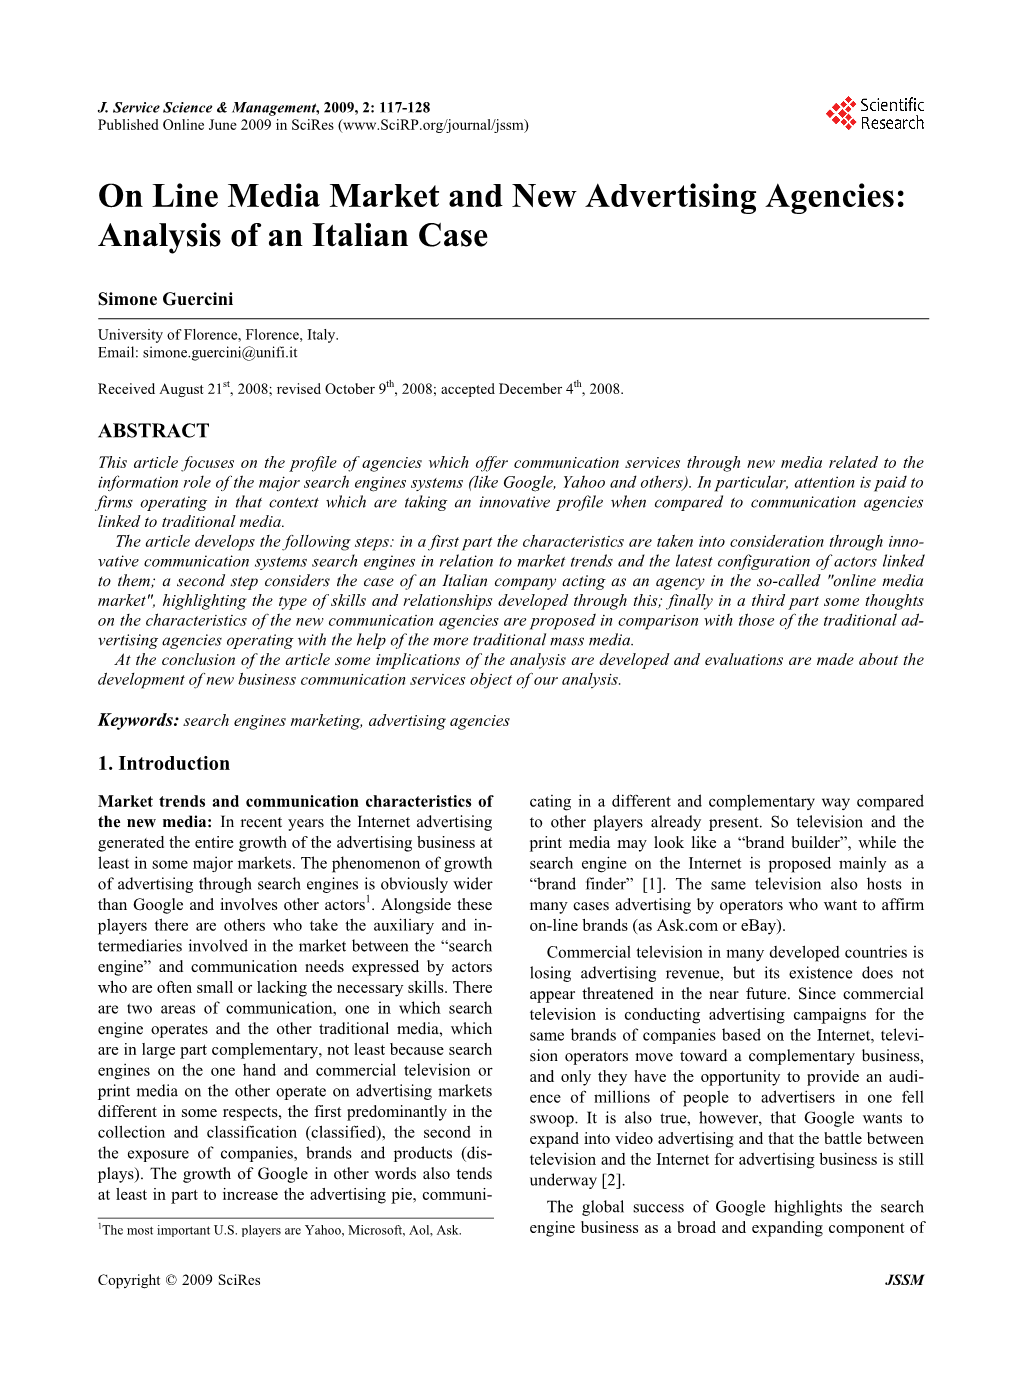 On Line Media Market and New Advertising Agencies: Analysis of an Italian Case